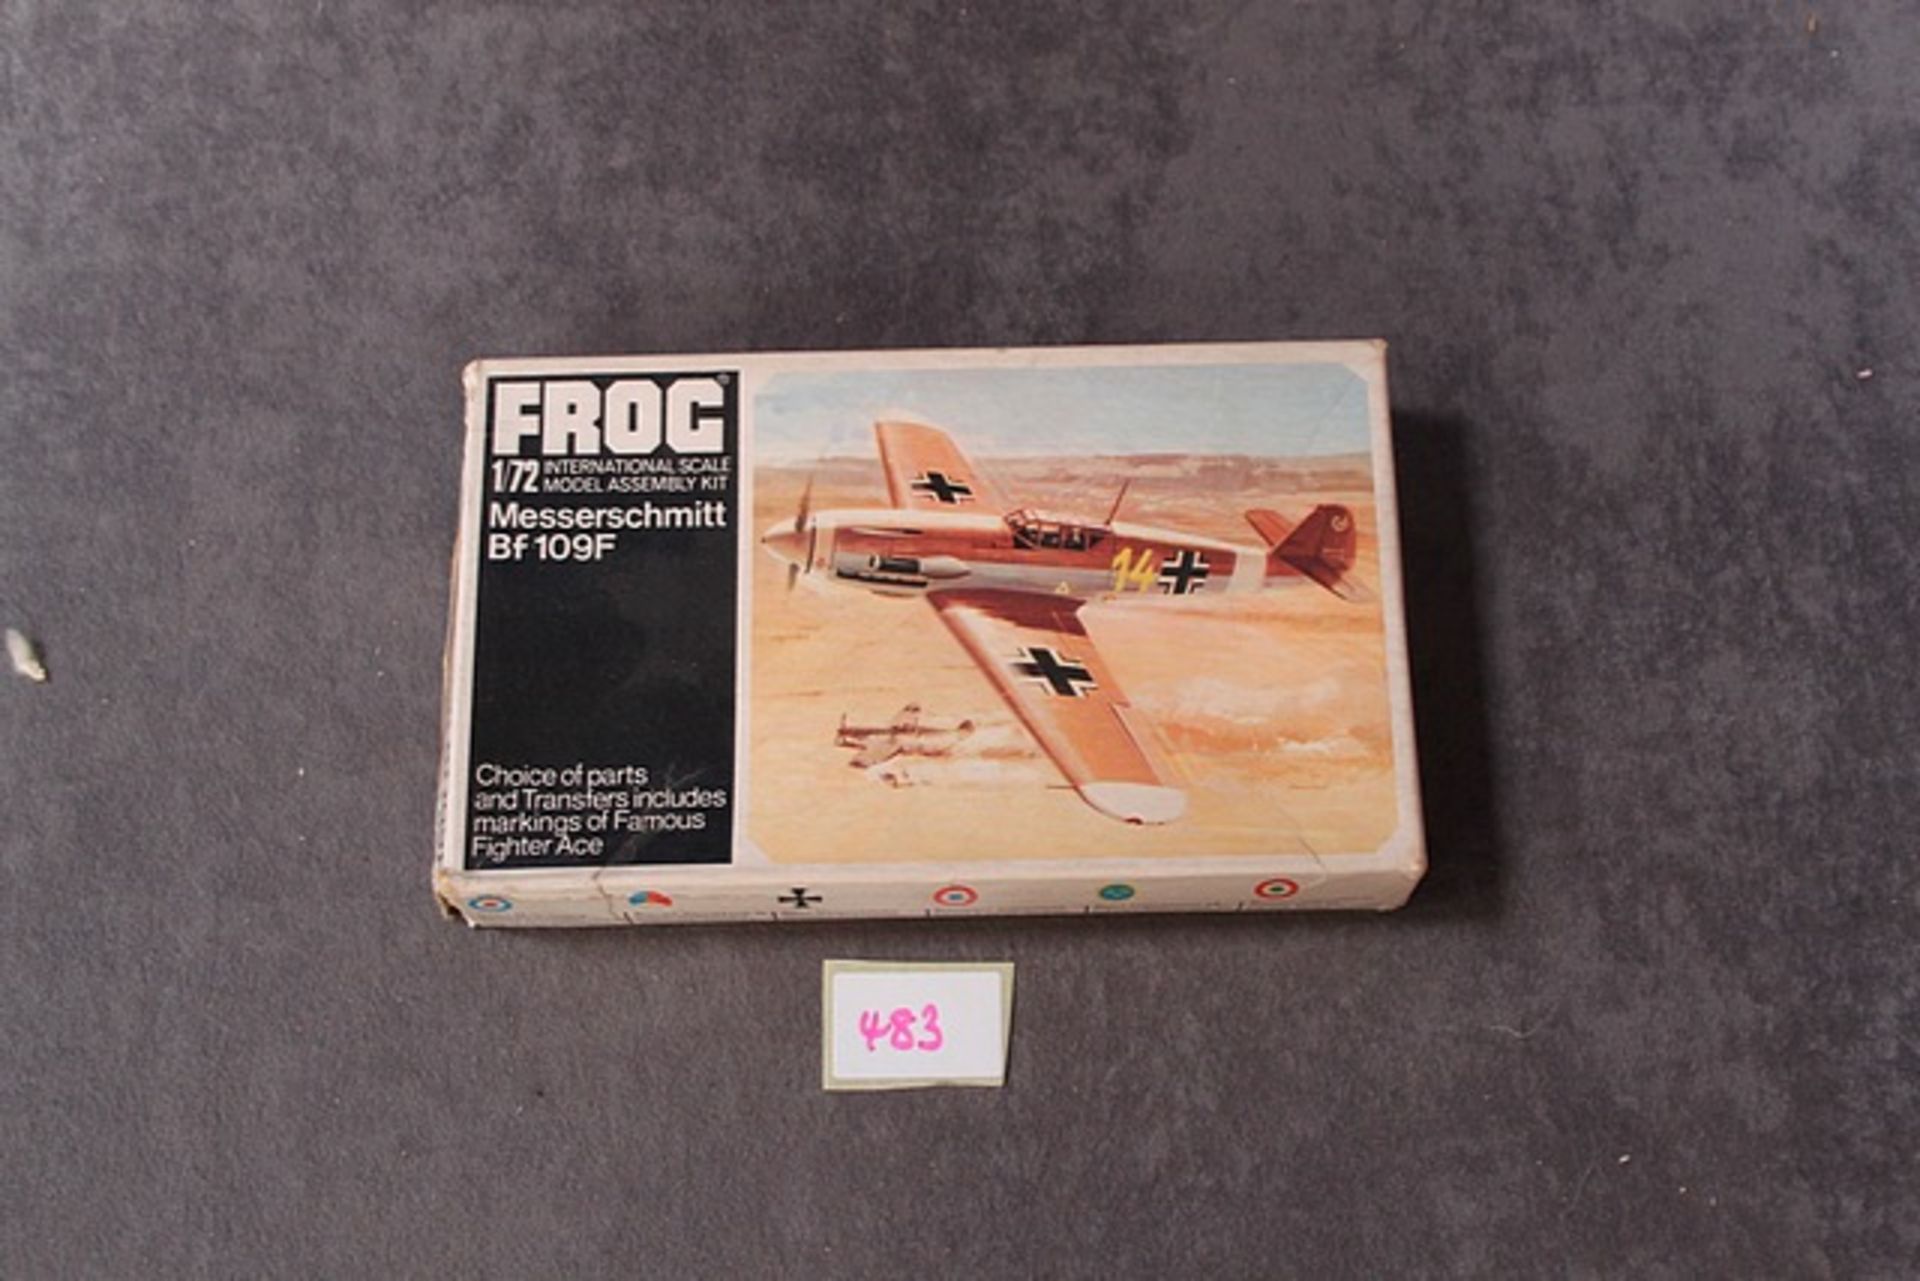 Frog Authentic Scale 1/72 Models Cat No F192 Messerschmitt with instructions in box